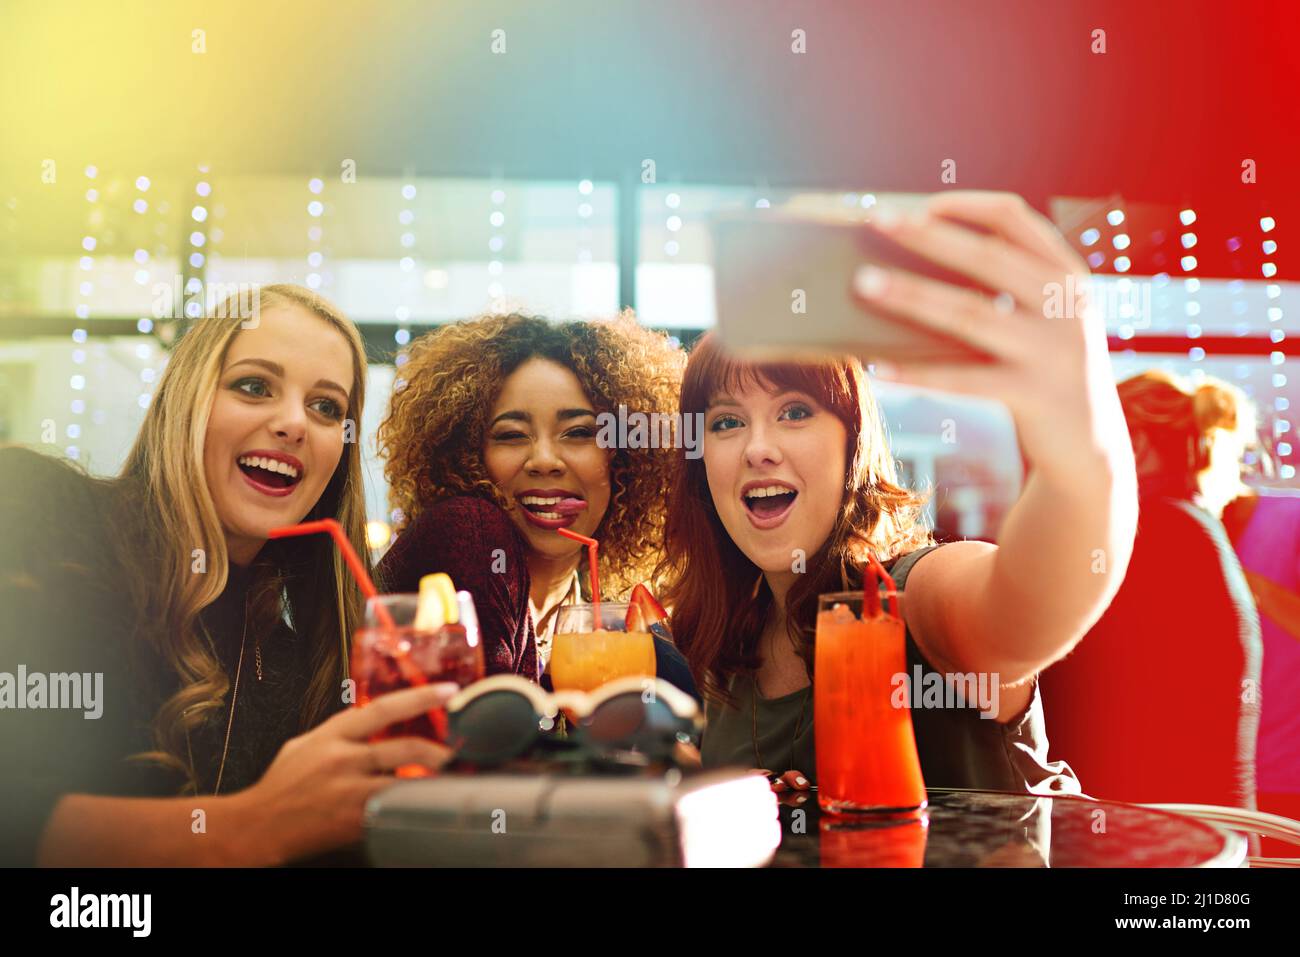 Memorable moments from the party. Shot of young friends taking selfies while having drinks at a party. Stock Photo